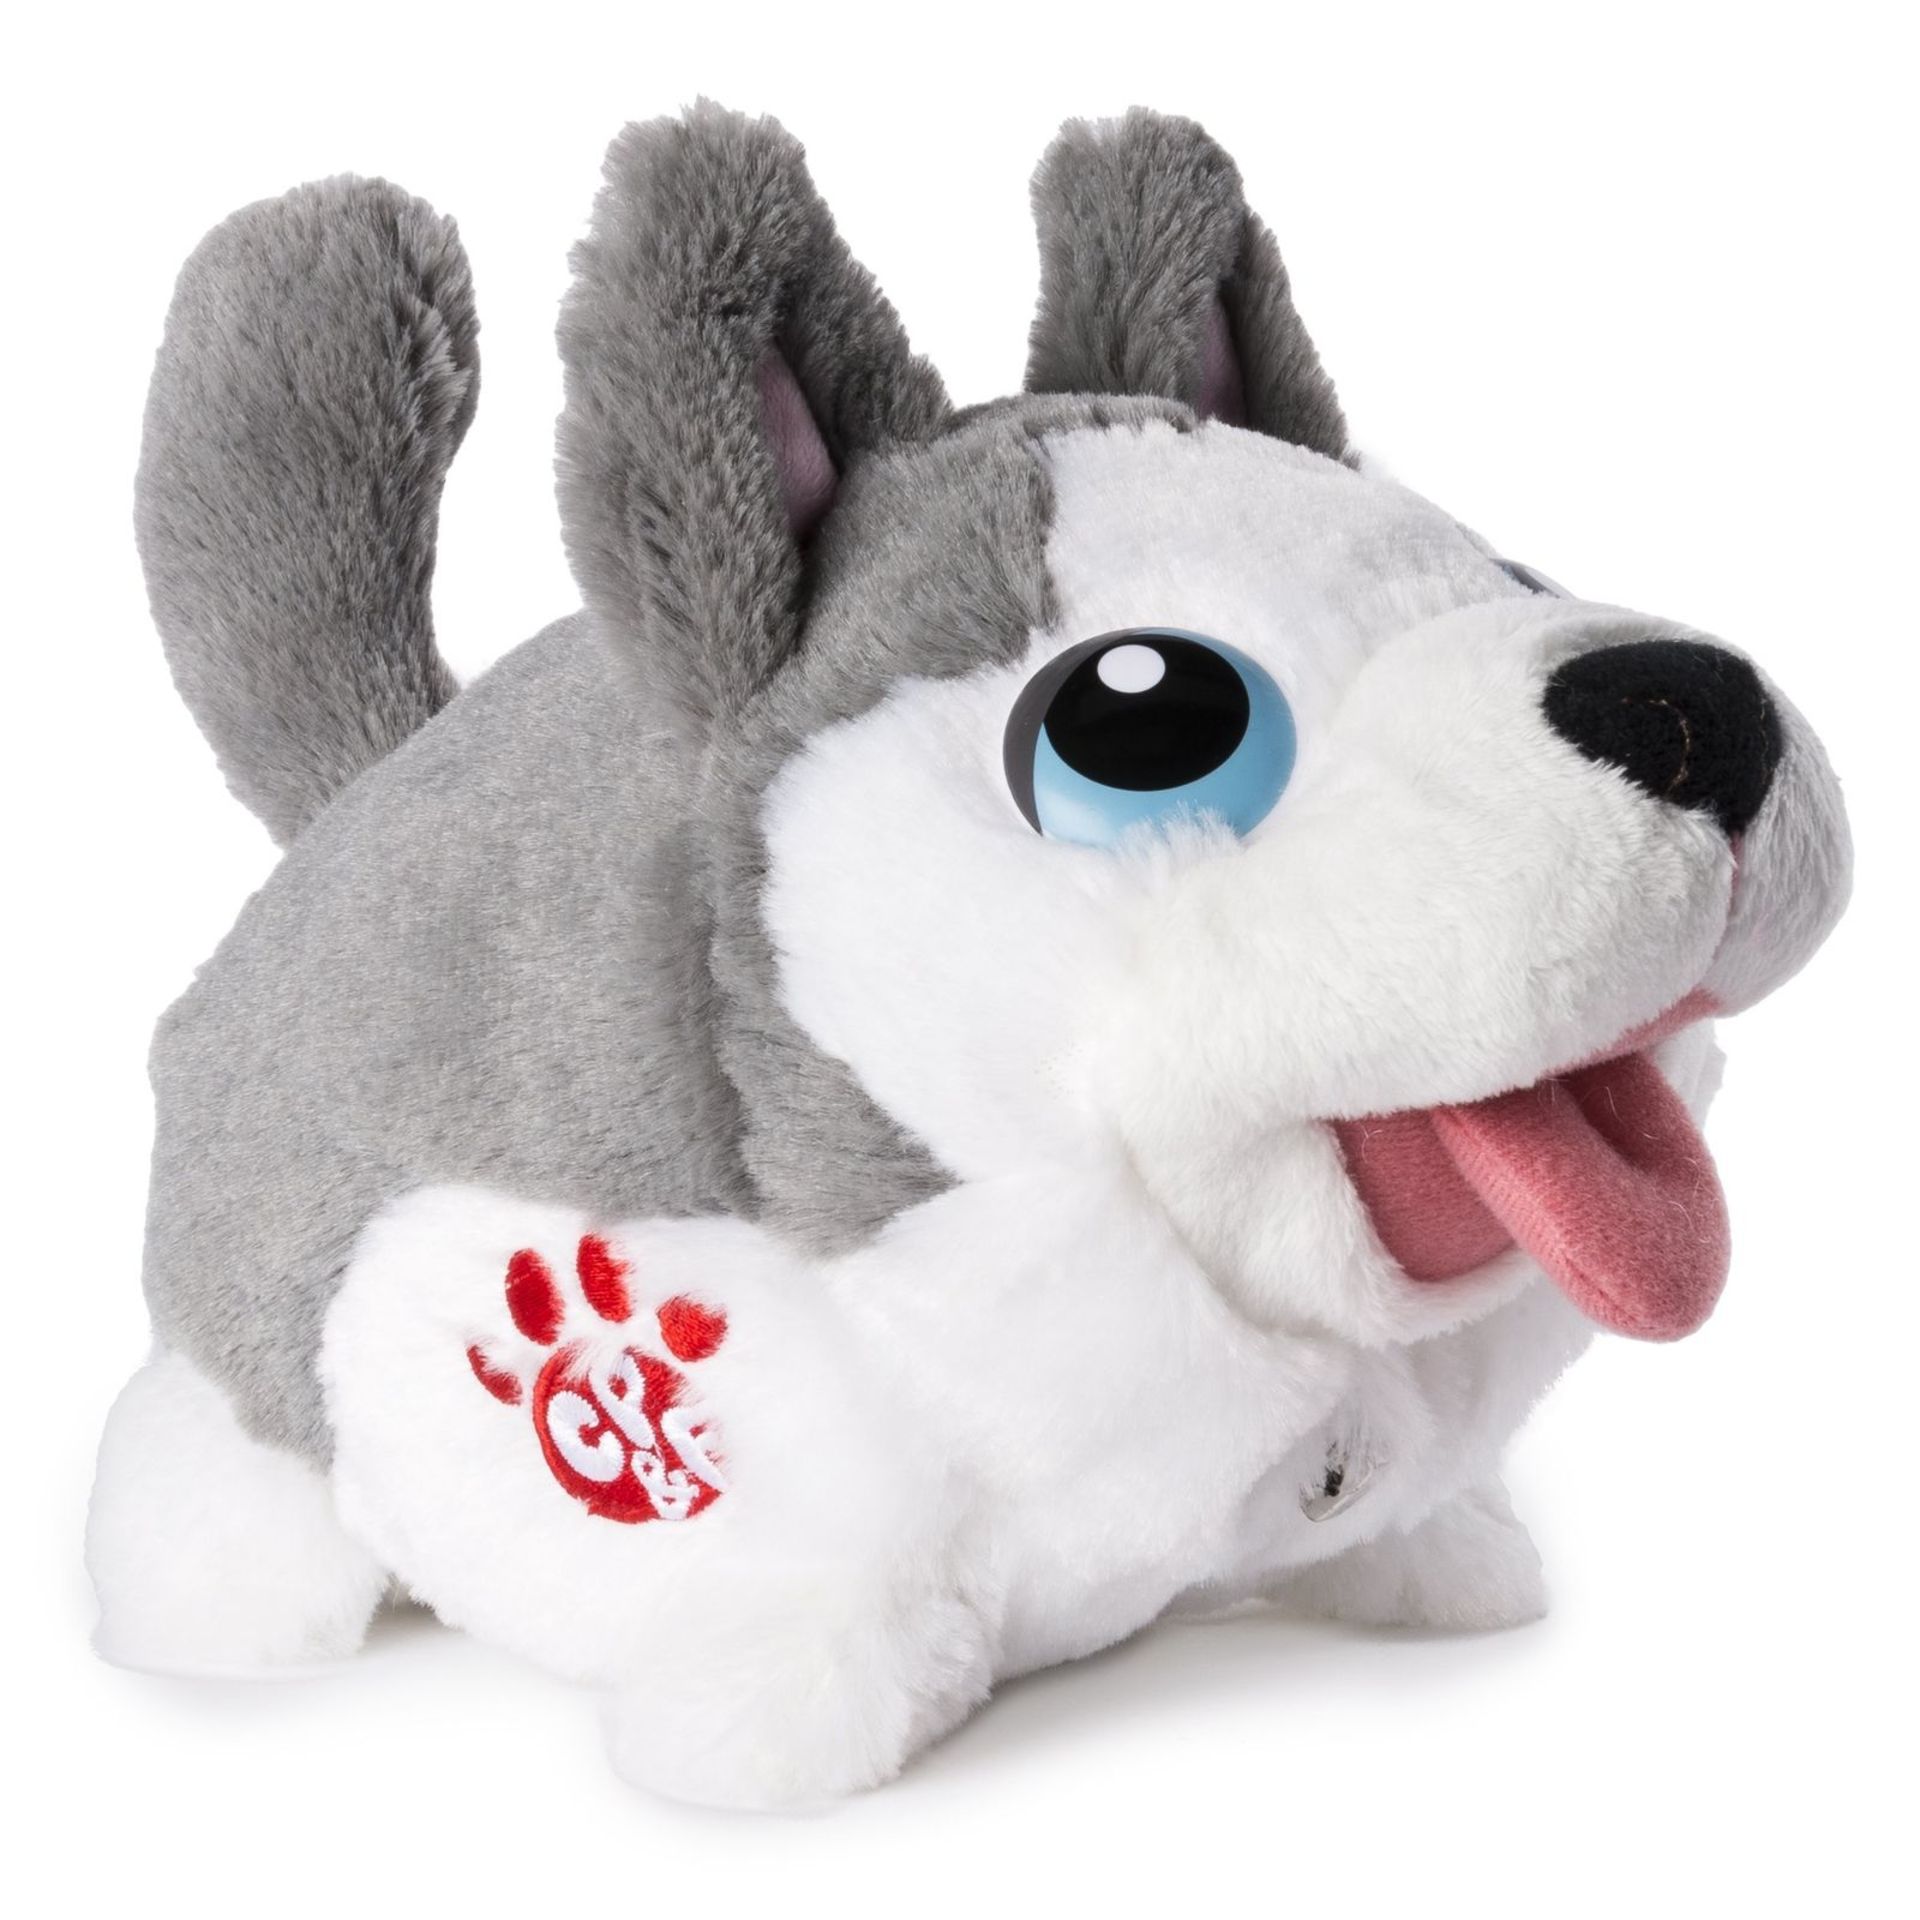 V Brand New Chubby Puppies & Friends - Husky - Storkz.com Price £24.83 - Moves When You Press Button